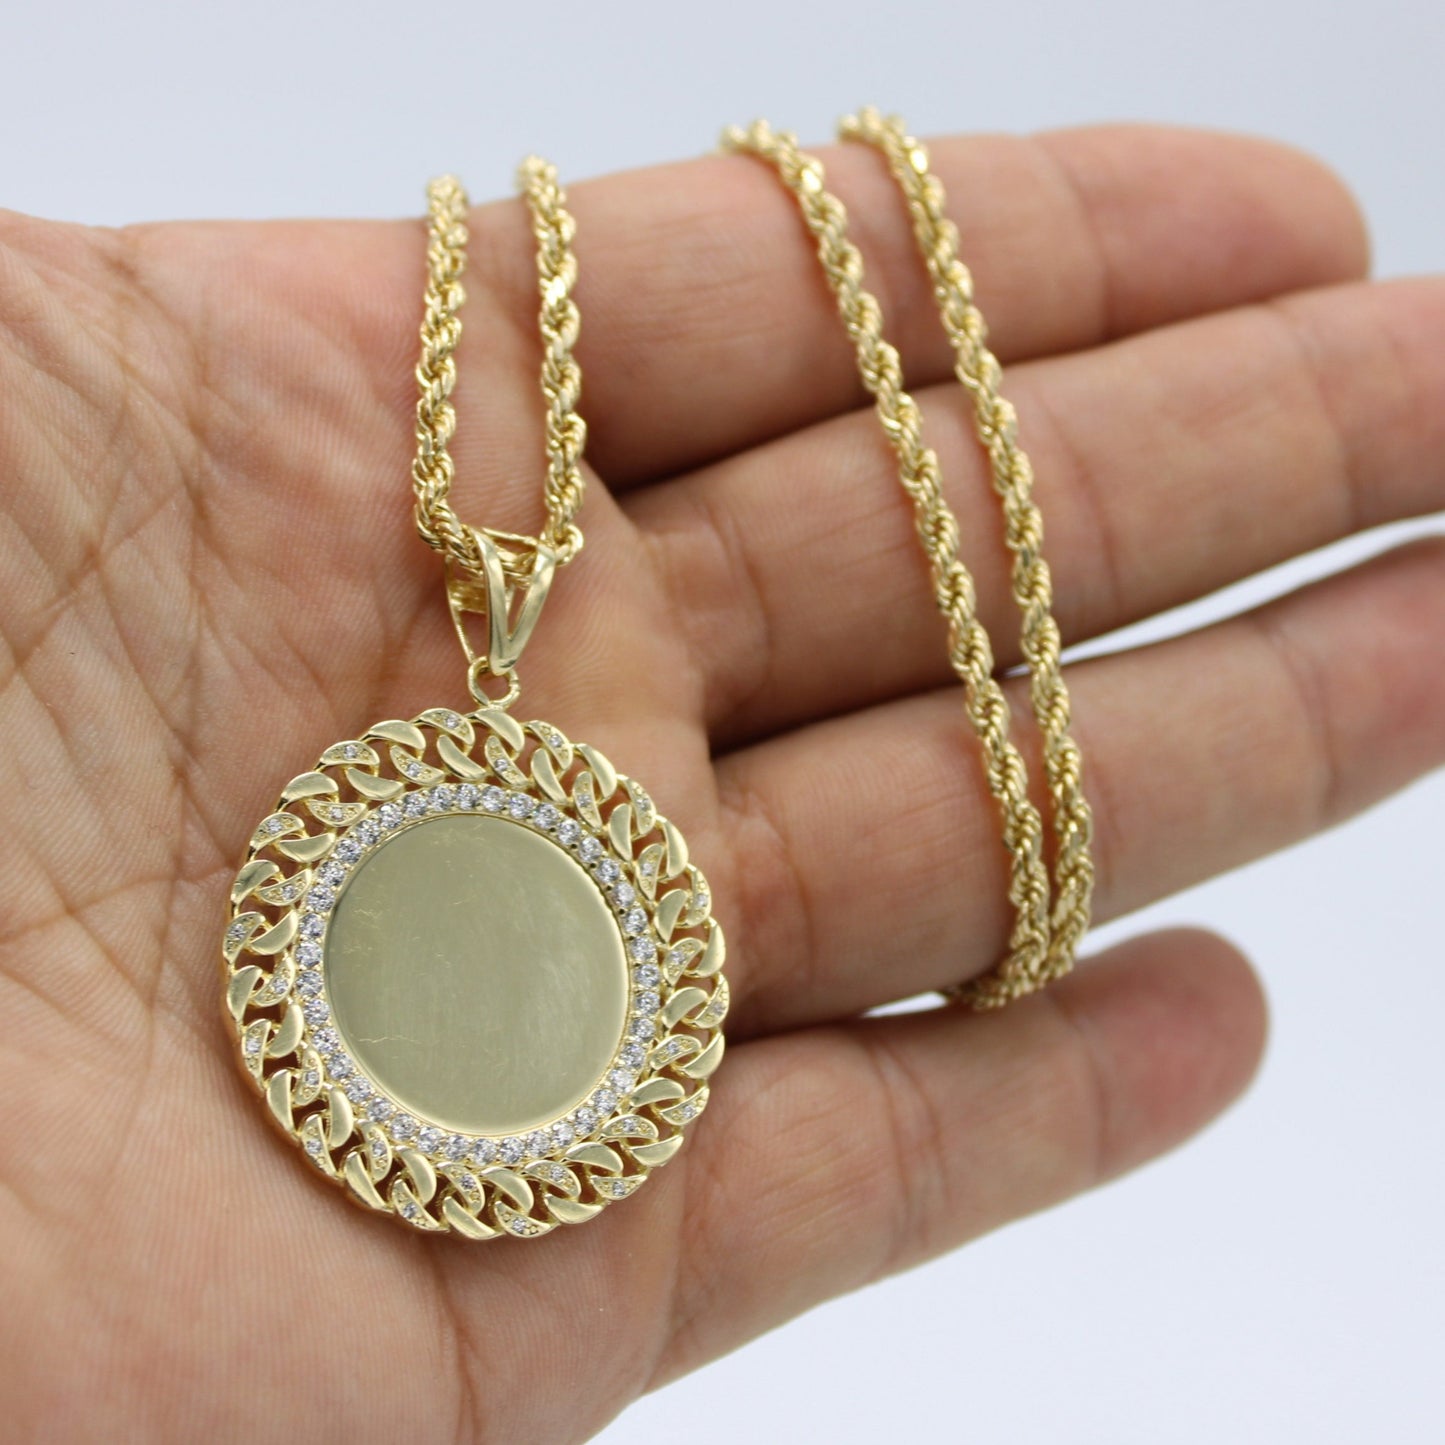 14K Round Picture Pendant Cz Stones with Rope Chain Yellow Gold